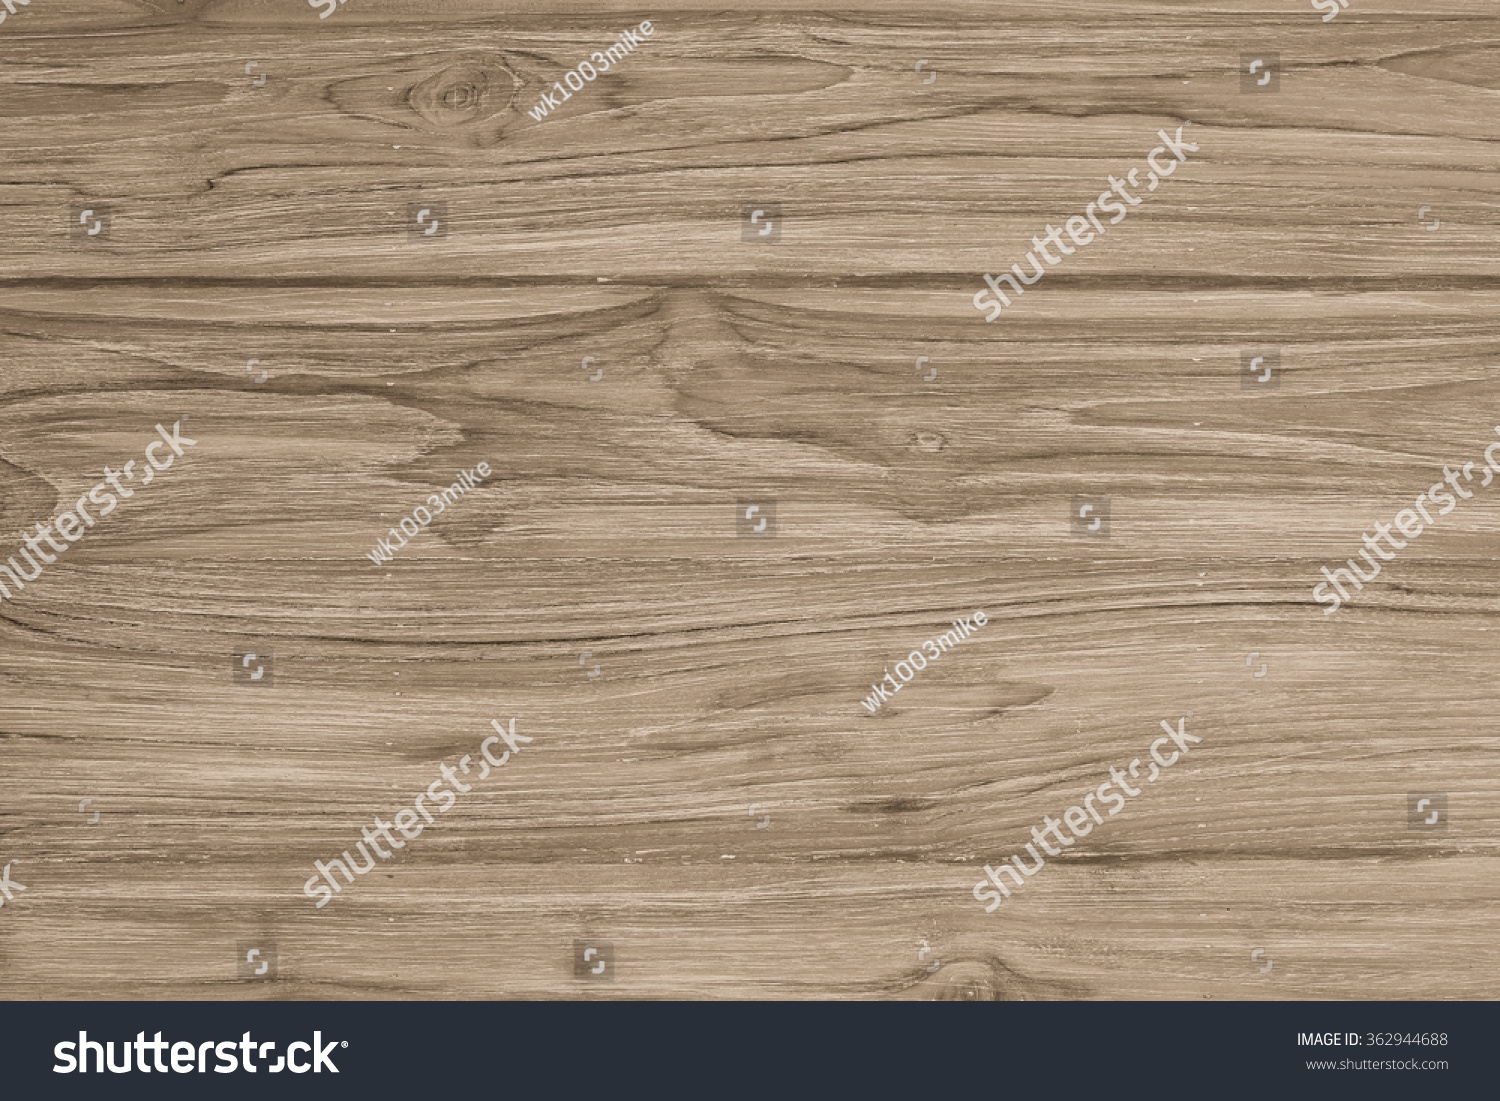 Wood texture with natural wood pattern for design and decoration #362944688